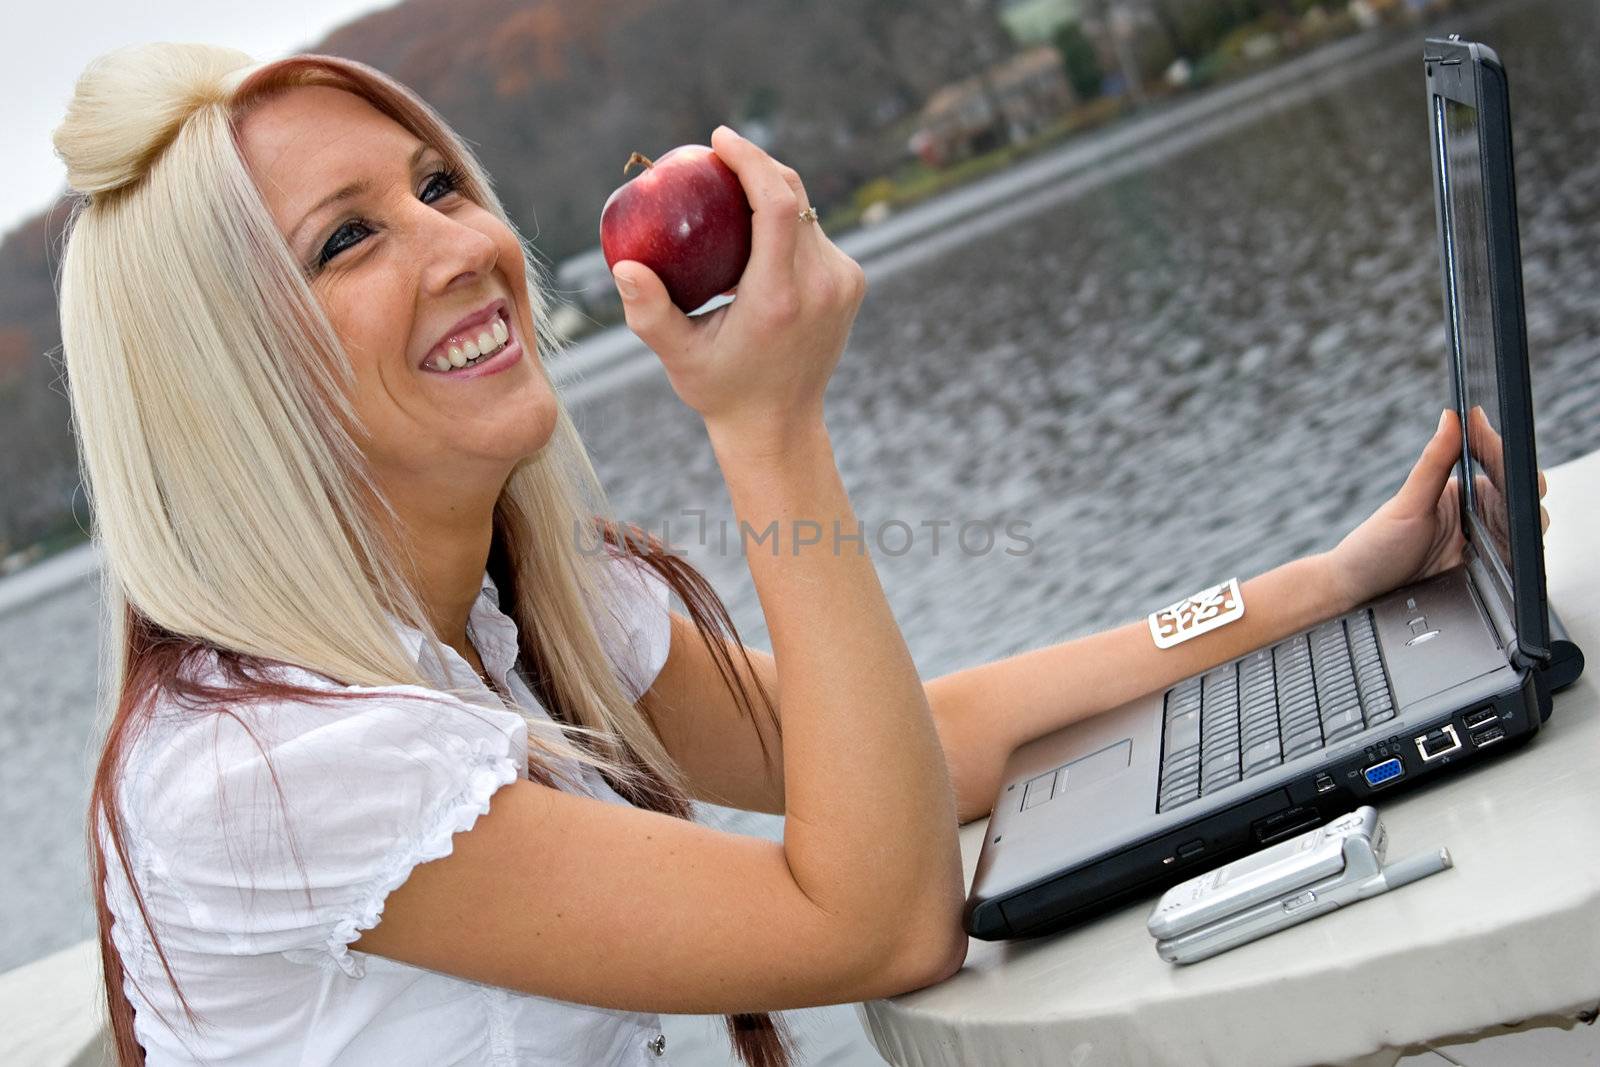 A beautiful young blonde woman in a mobile business setting eating a red apple.